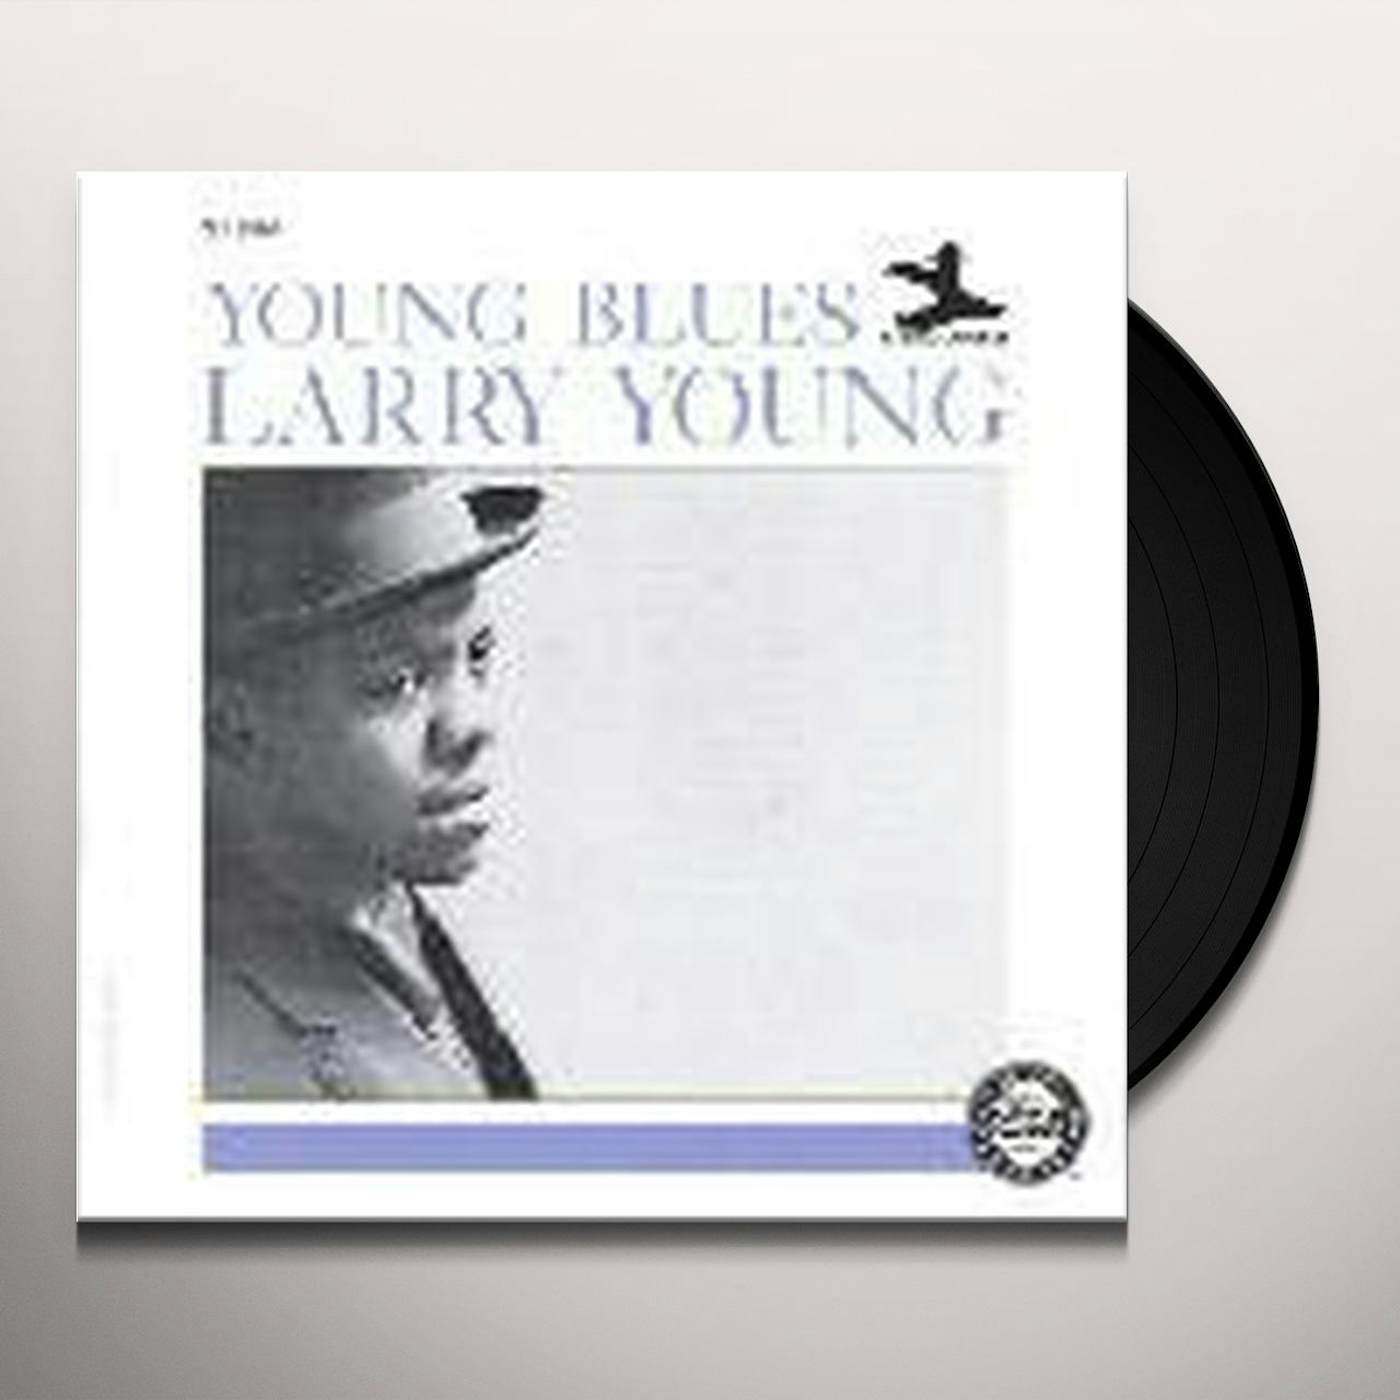 Larry Young Young Blues Vinyl Record